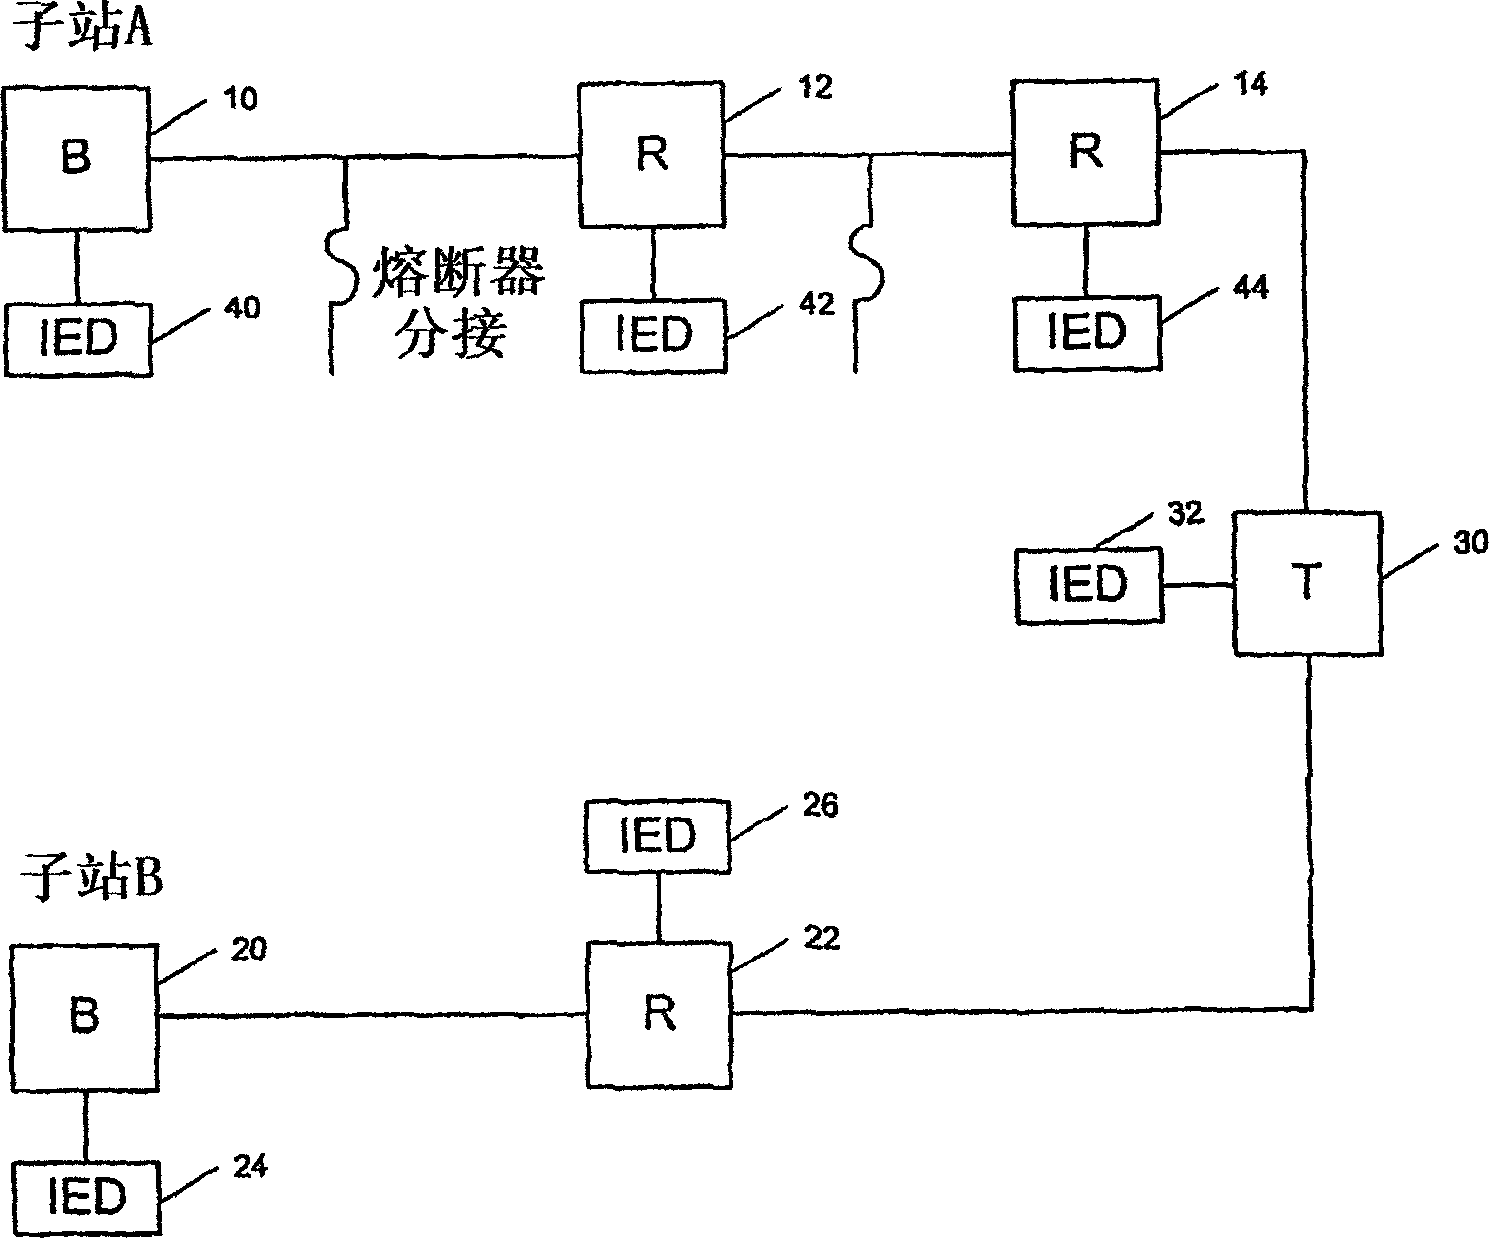 Automated intelligent configuration tool for power system protection and control and monitoring devices